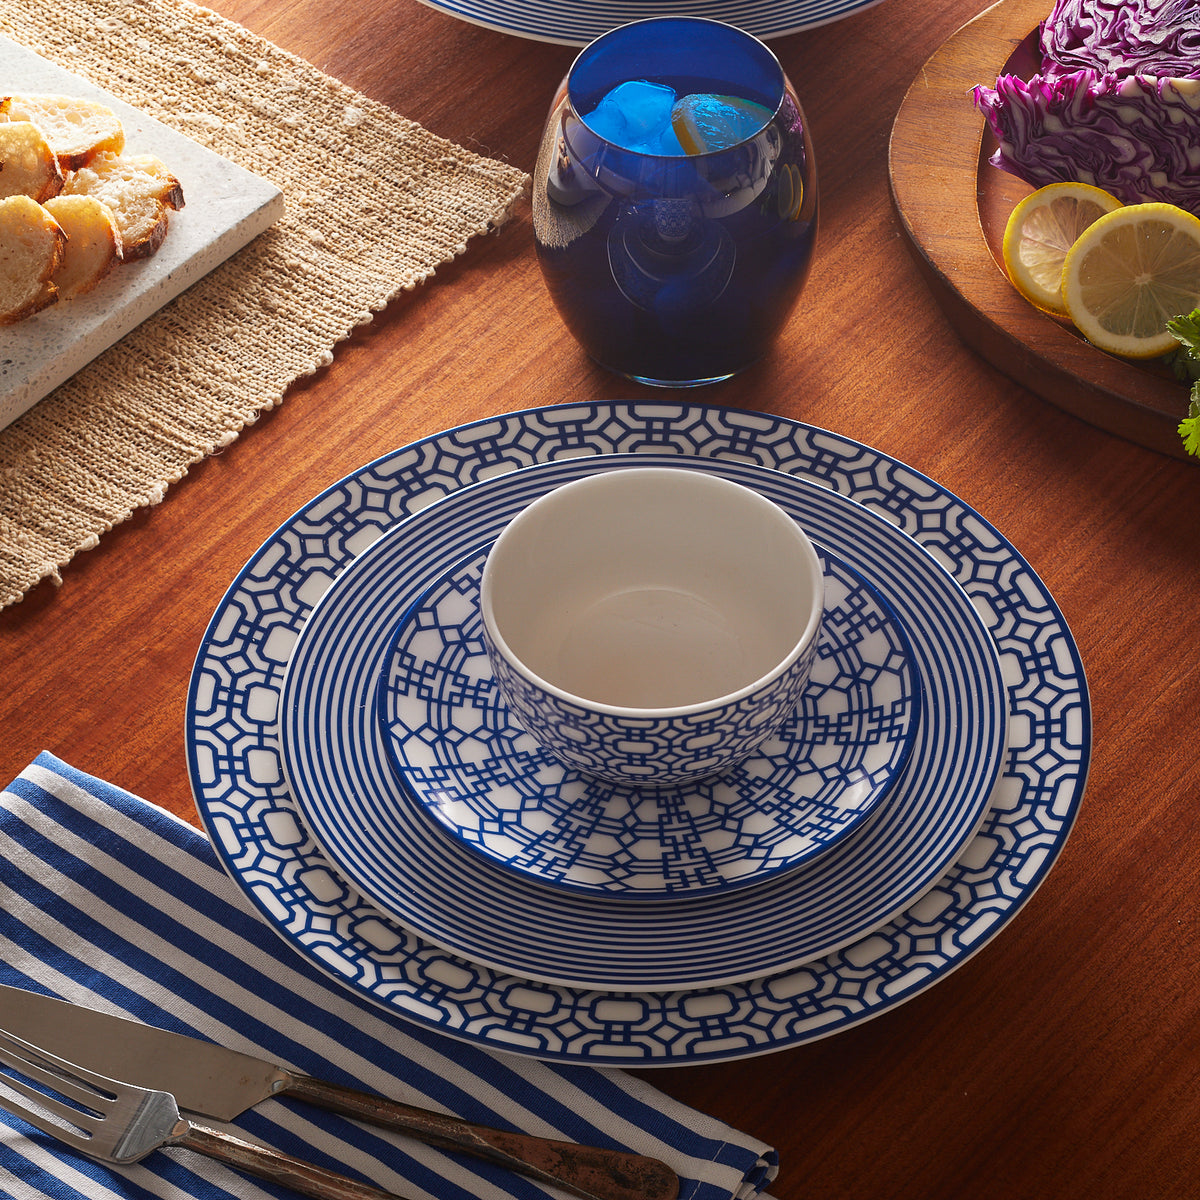 A table setup featuring contemporary dinnerware, including a blue and white patterned bowl, plate, and soup plate; a blue glass with ice; a Caskata Artisanal Home Newport Garden Gate Rimmed Dinner Plate of bread; and a striped napkin with utensils. This coastal collection seamlessly combines elegance and modern design.